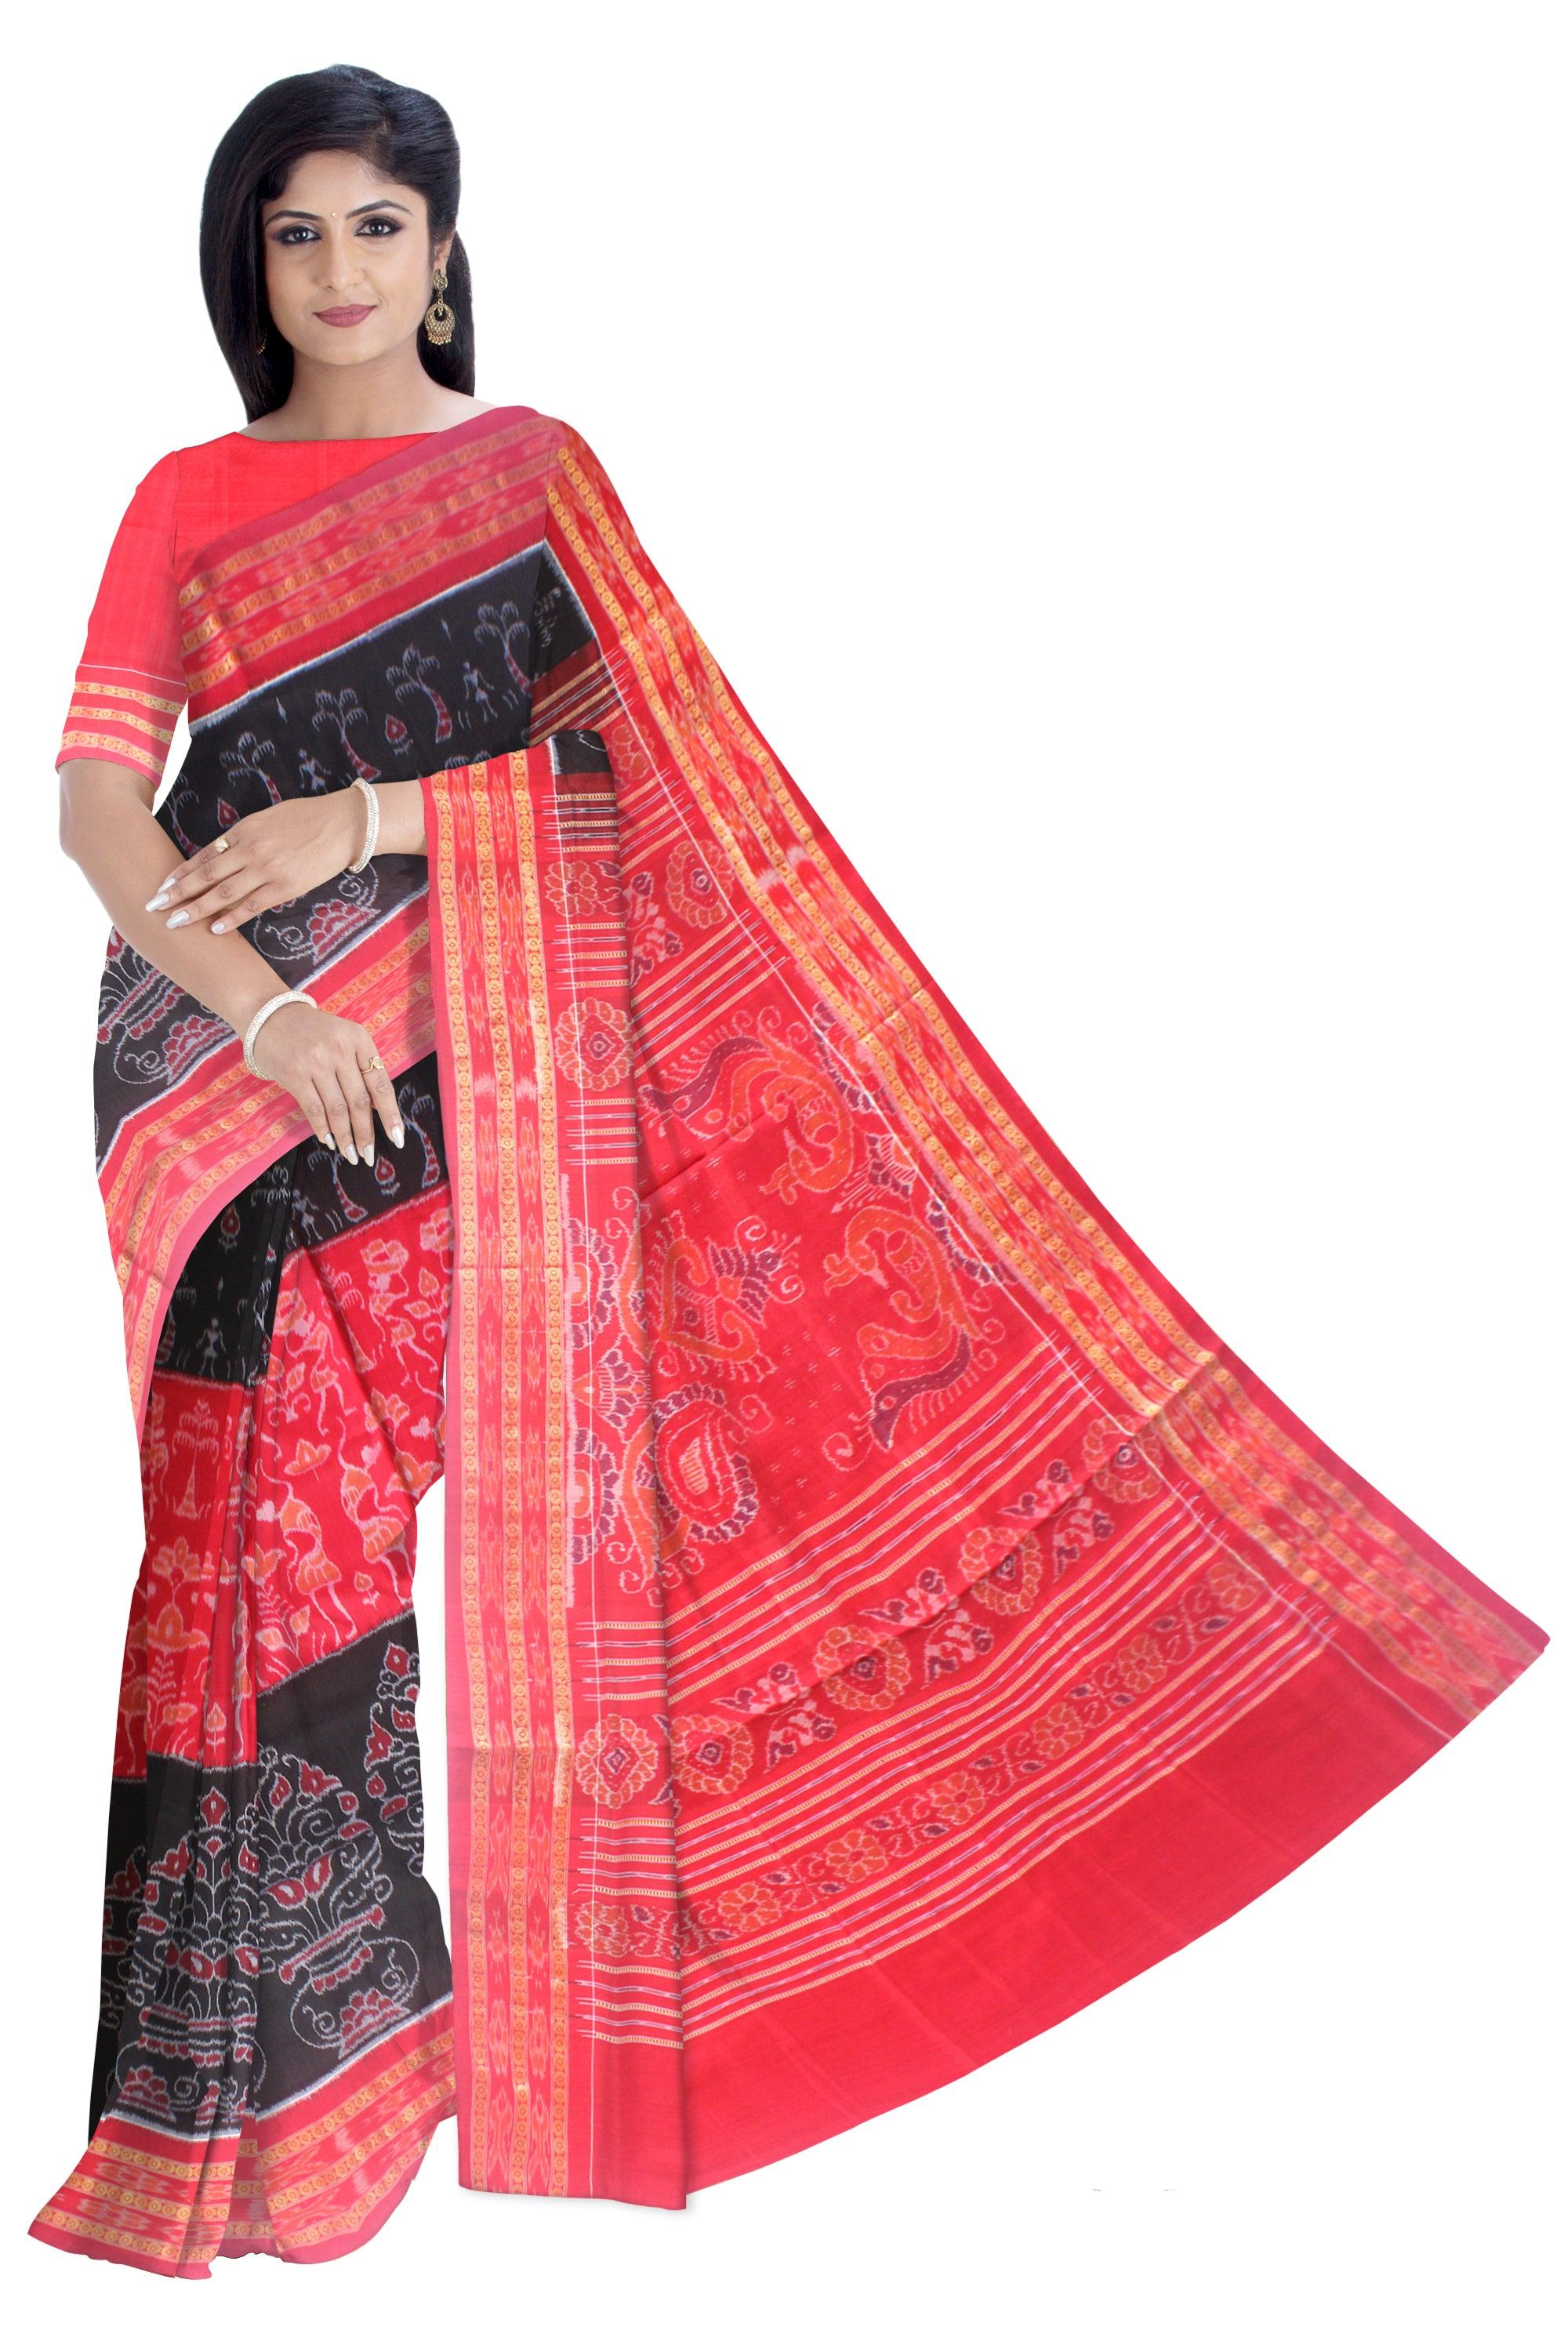 NEW COLECTION  TERRACOTTA BASED PURE COTTON SAREE IN BLACK AND RED COLOUR AVAILABLE WITH BLOUSE . - Koshali Arts & Crafts Enterprise